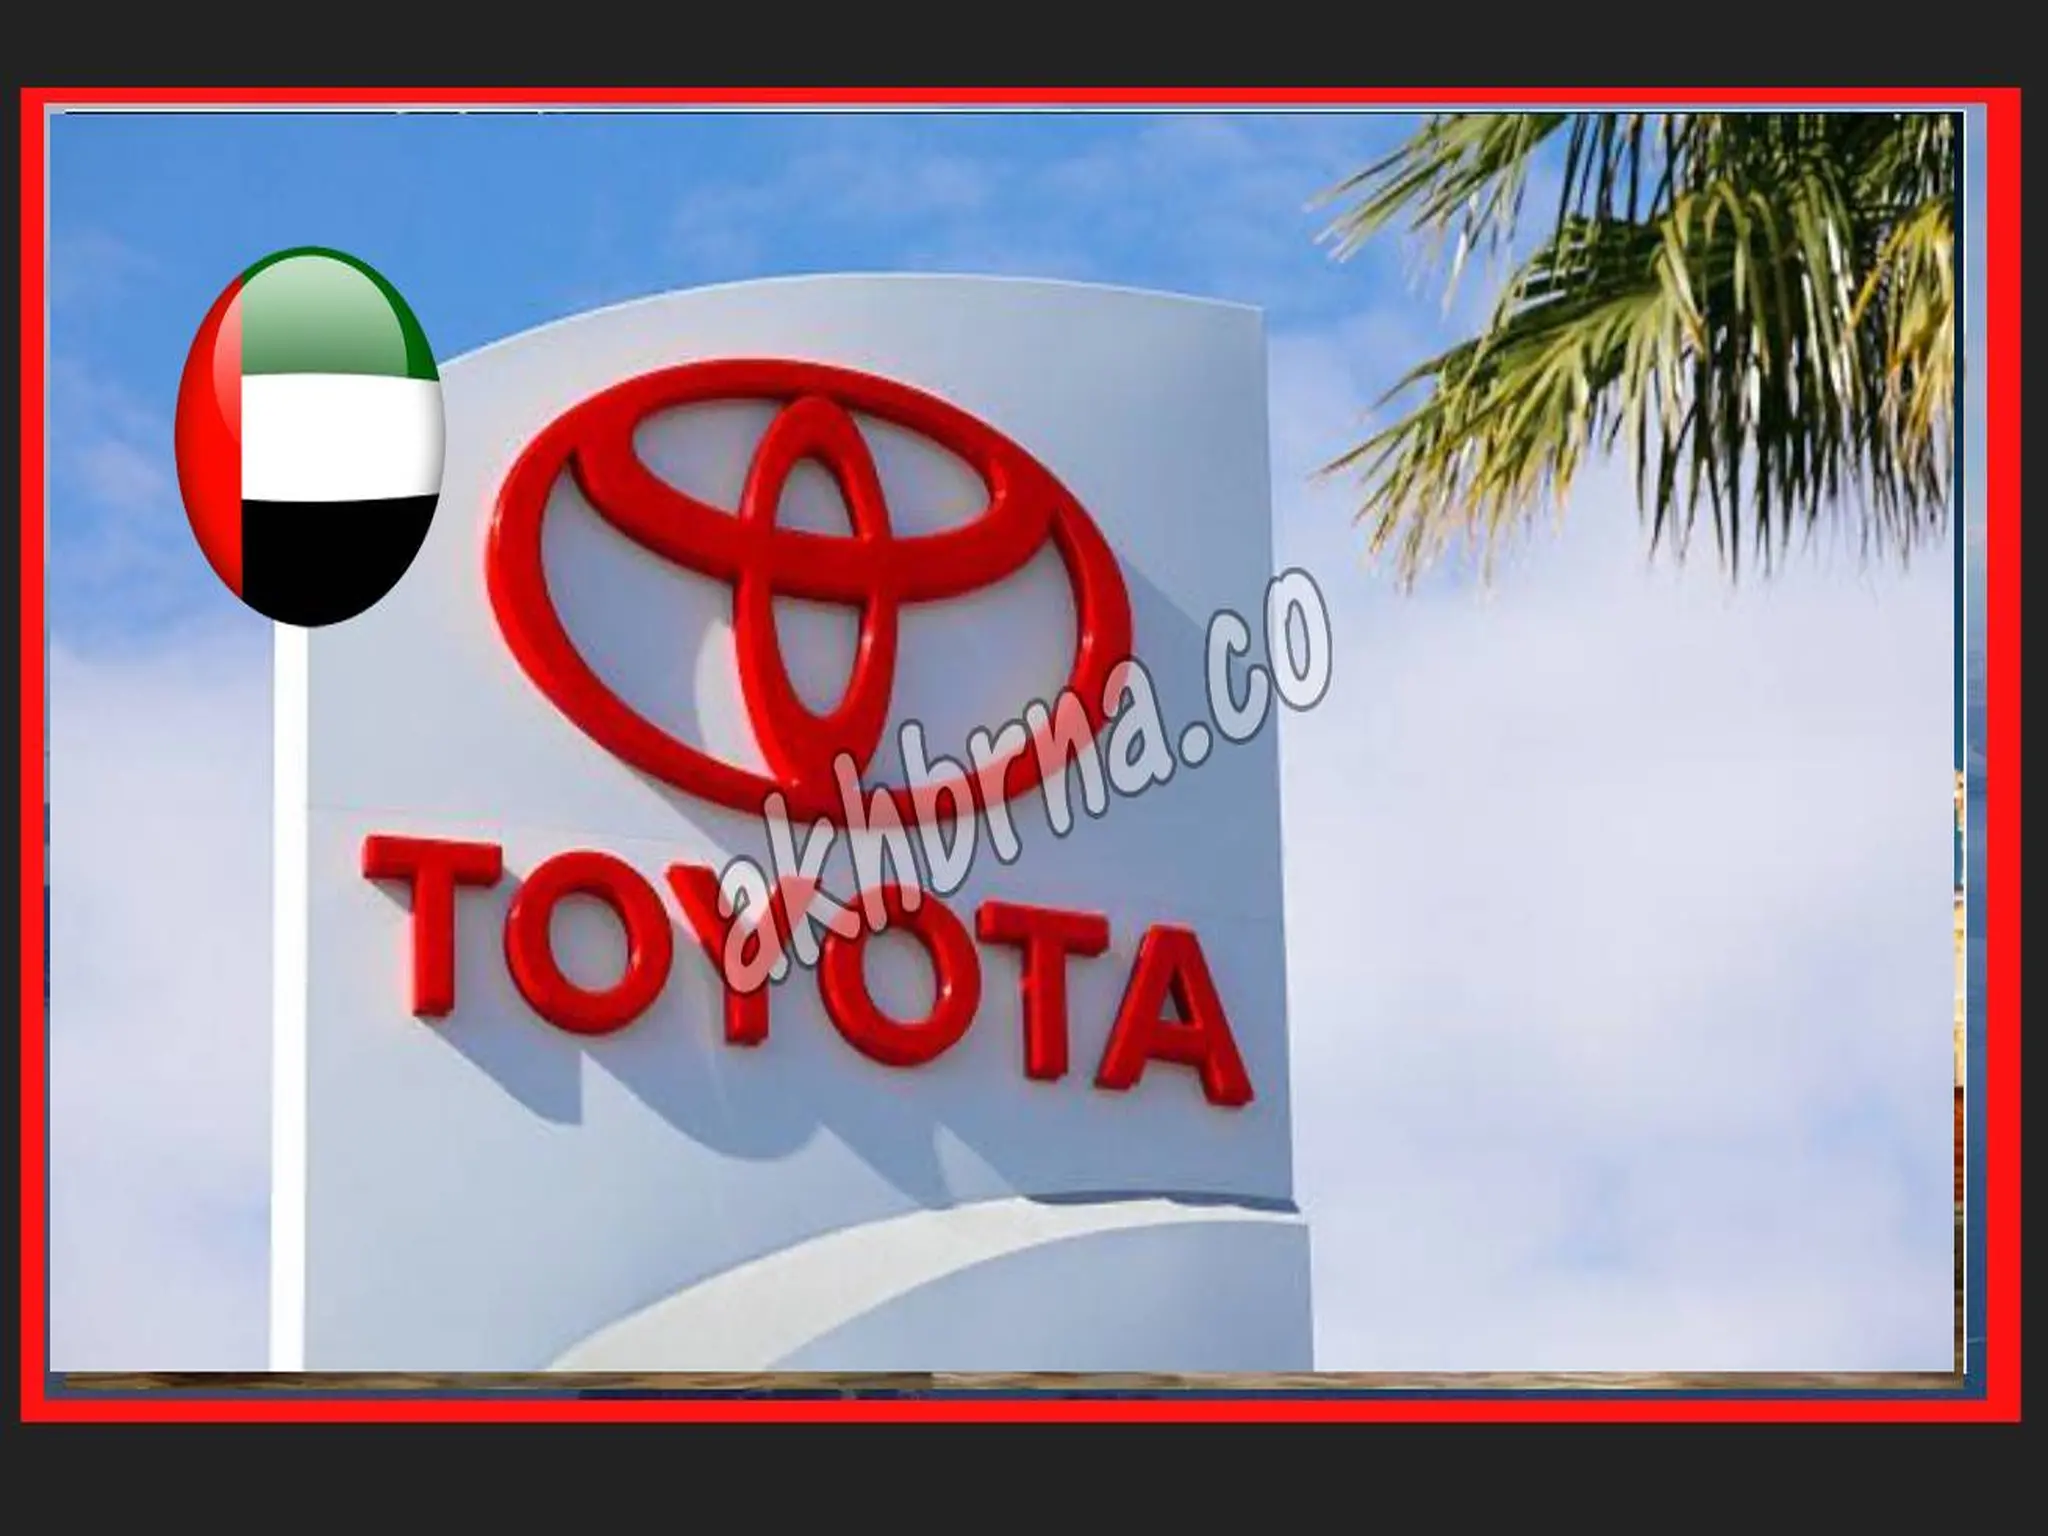 Toyota Recalls 1 Million Vehicles Due to Airbag Sensor Issues